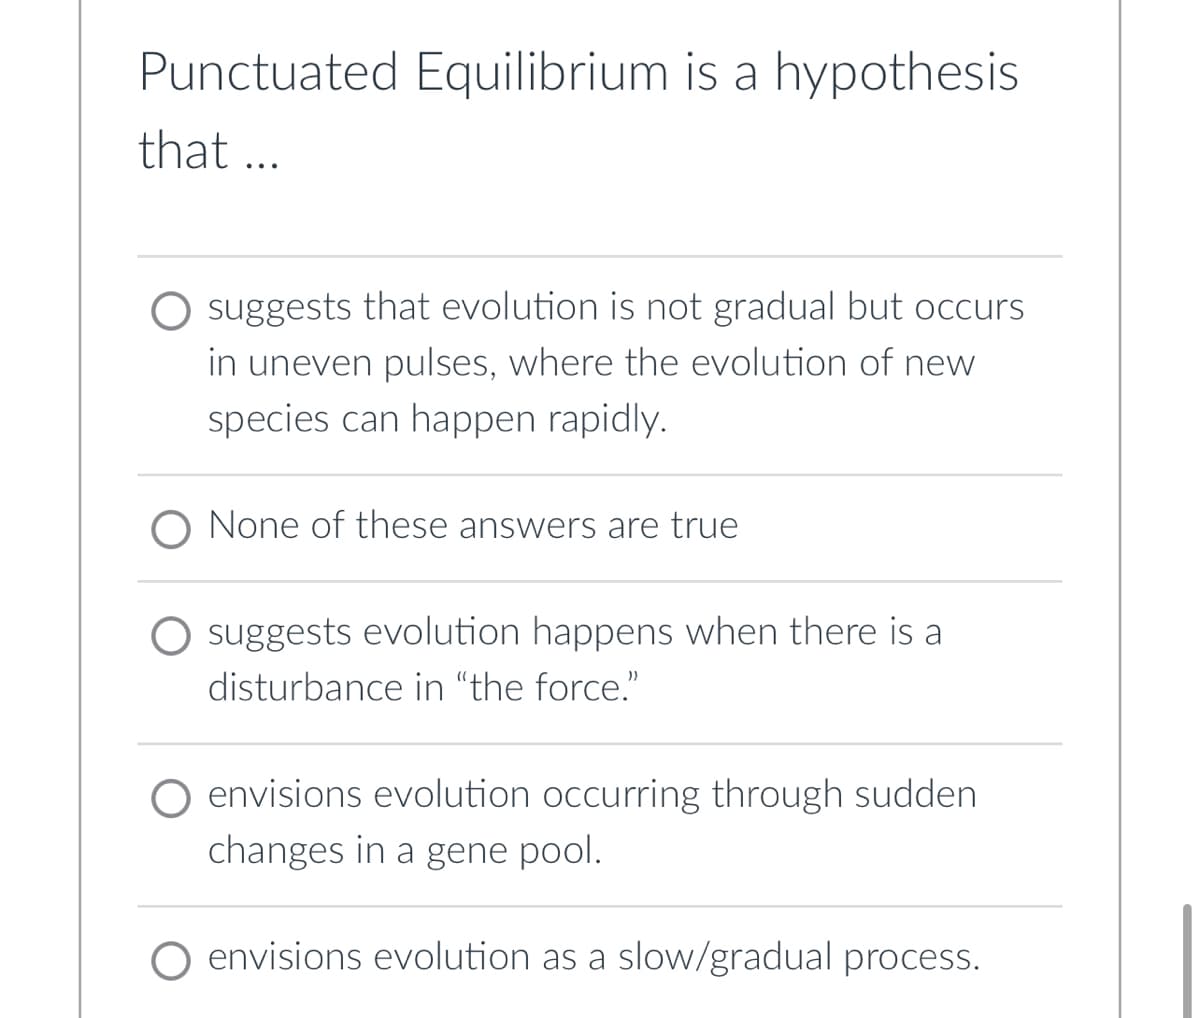 Punctuated Equilibrium is a hypothesis
that ...
suggests that evolution is not gradual but occurs
in uneven pulses, where the evolution of new
species can happen rapidly.
O None of these answers are true
suggests evolution happens when there is a
disturbance in "the force."
O envisions evolution occurring through sudden
changes in a gene pool.
envisions evolution as a slow/gradual process.